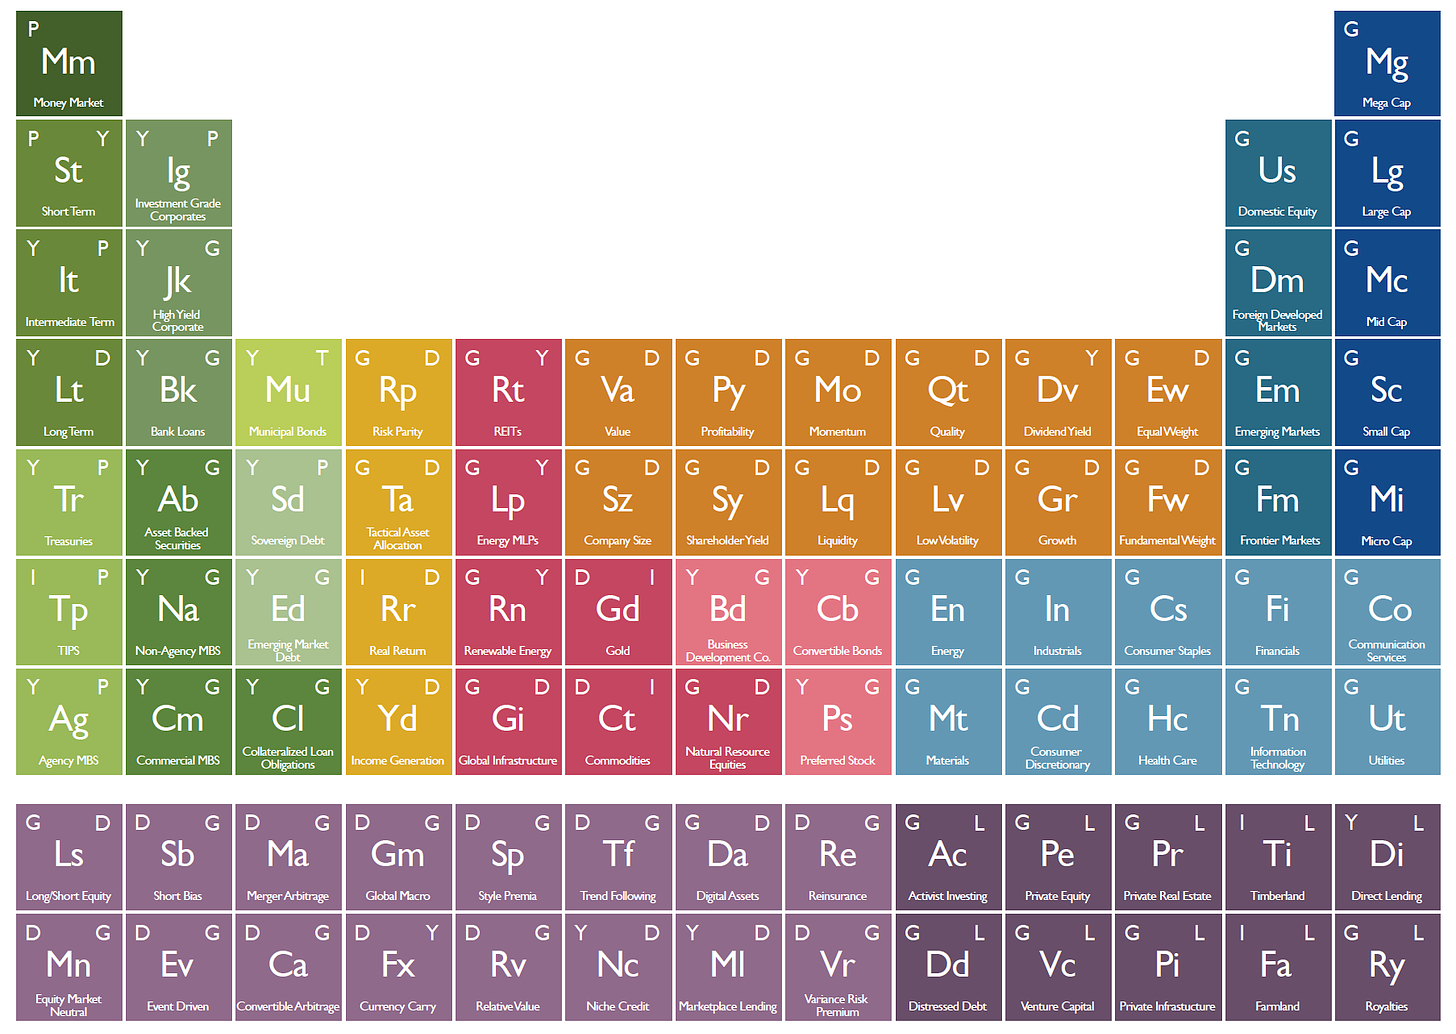 Periodic Table of Investments